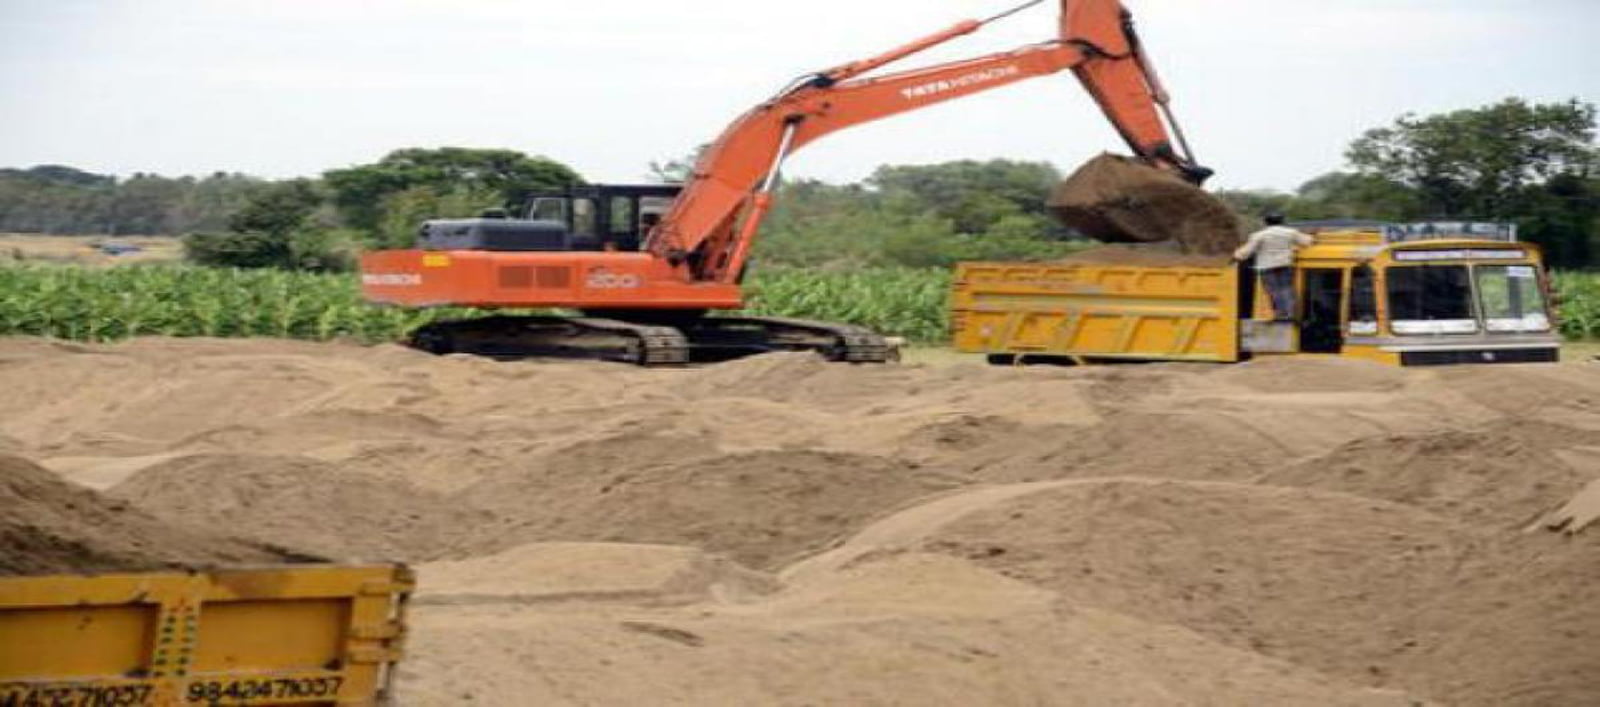 jayaprakash power secures two year sand mining contract from ap govt